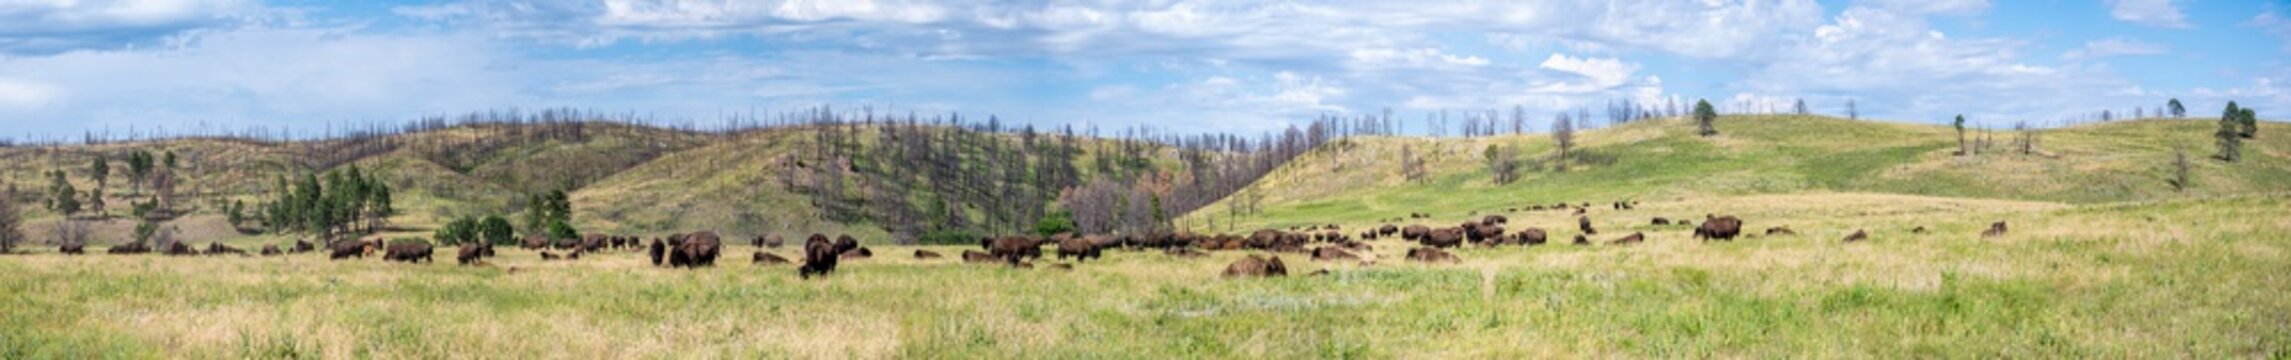 Panoramic open grassland prairie with buffalo at Custer State Park in South Dakota, USA